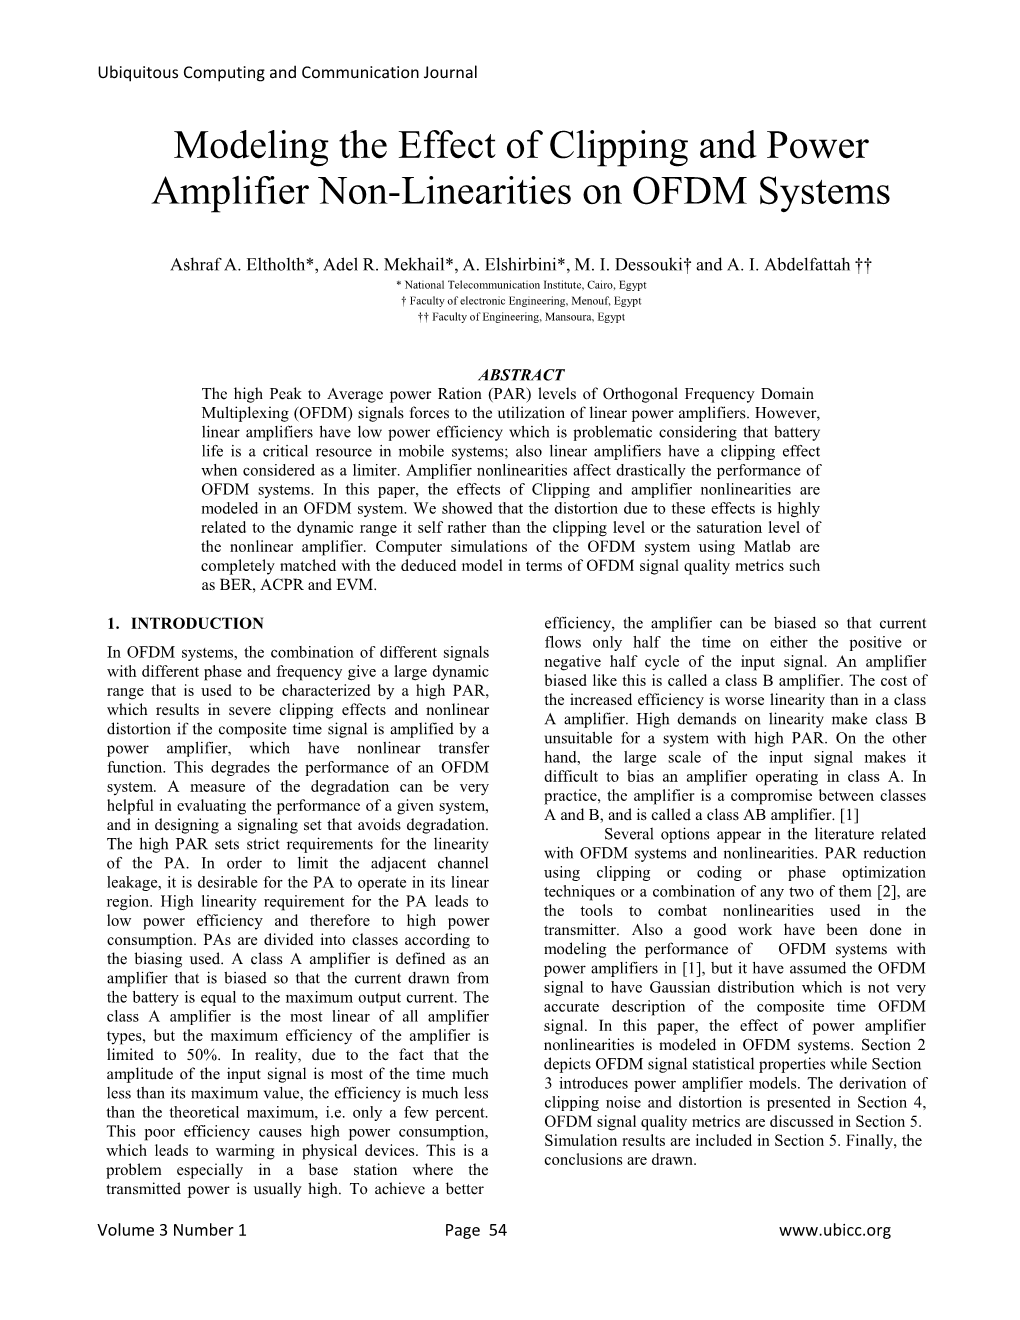 Modeling the Effect of Clipping and Power Amplifier Non-Linearities on OFDM Systems